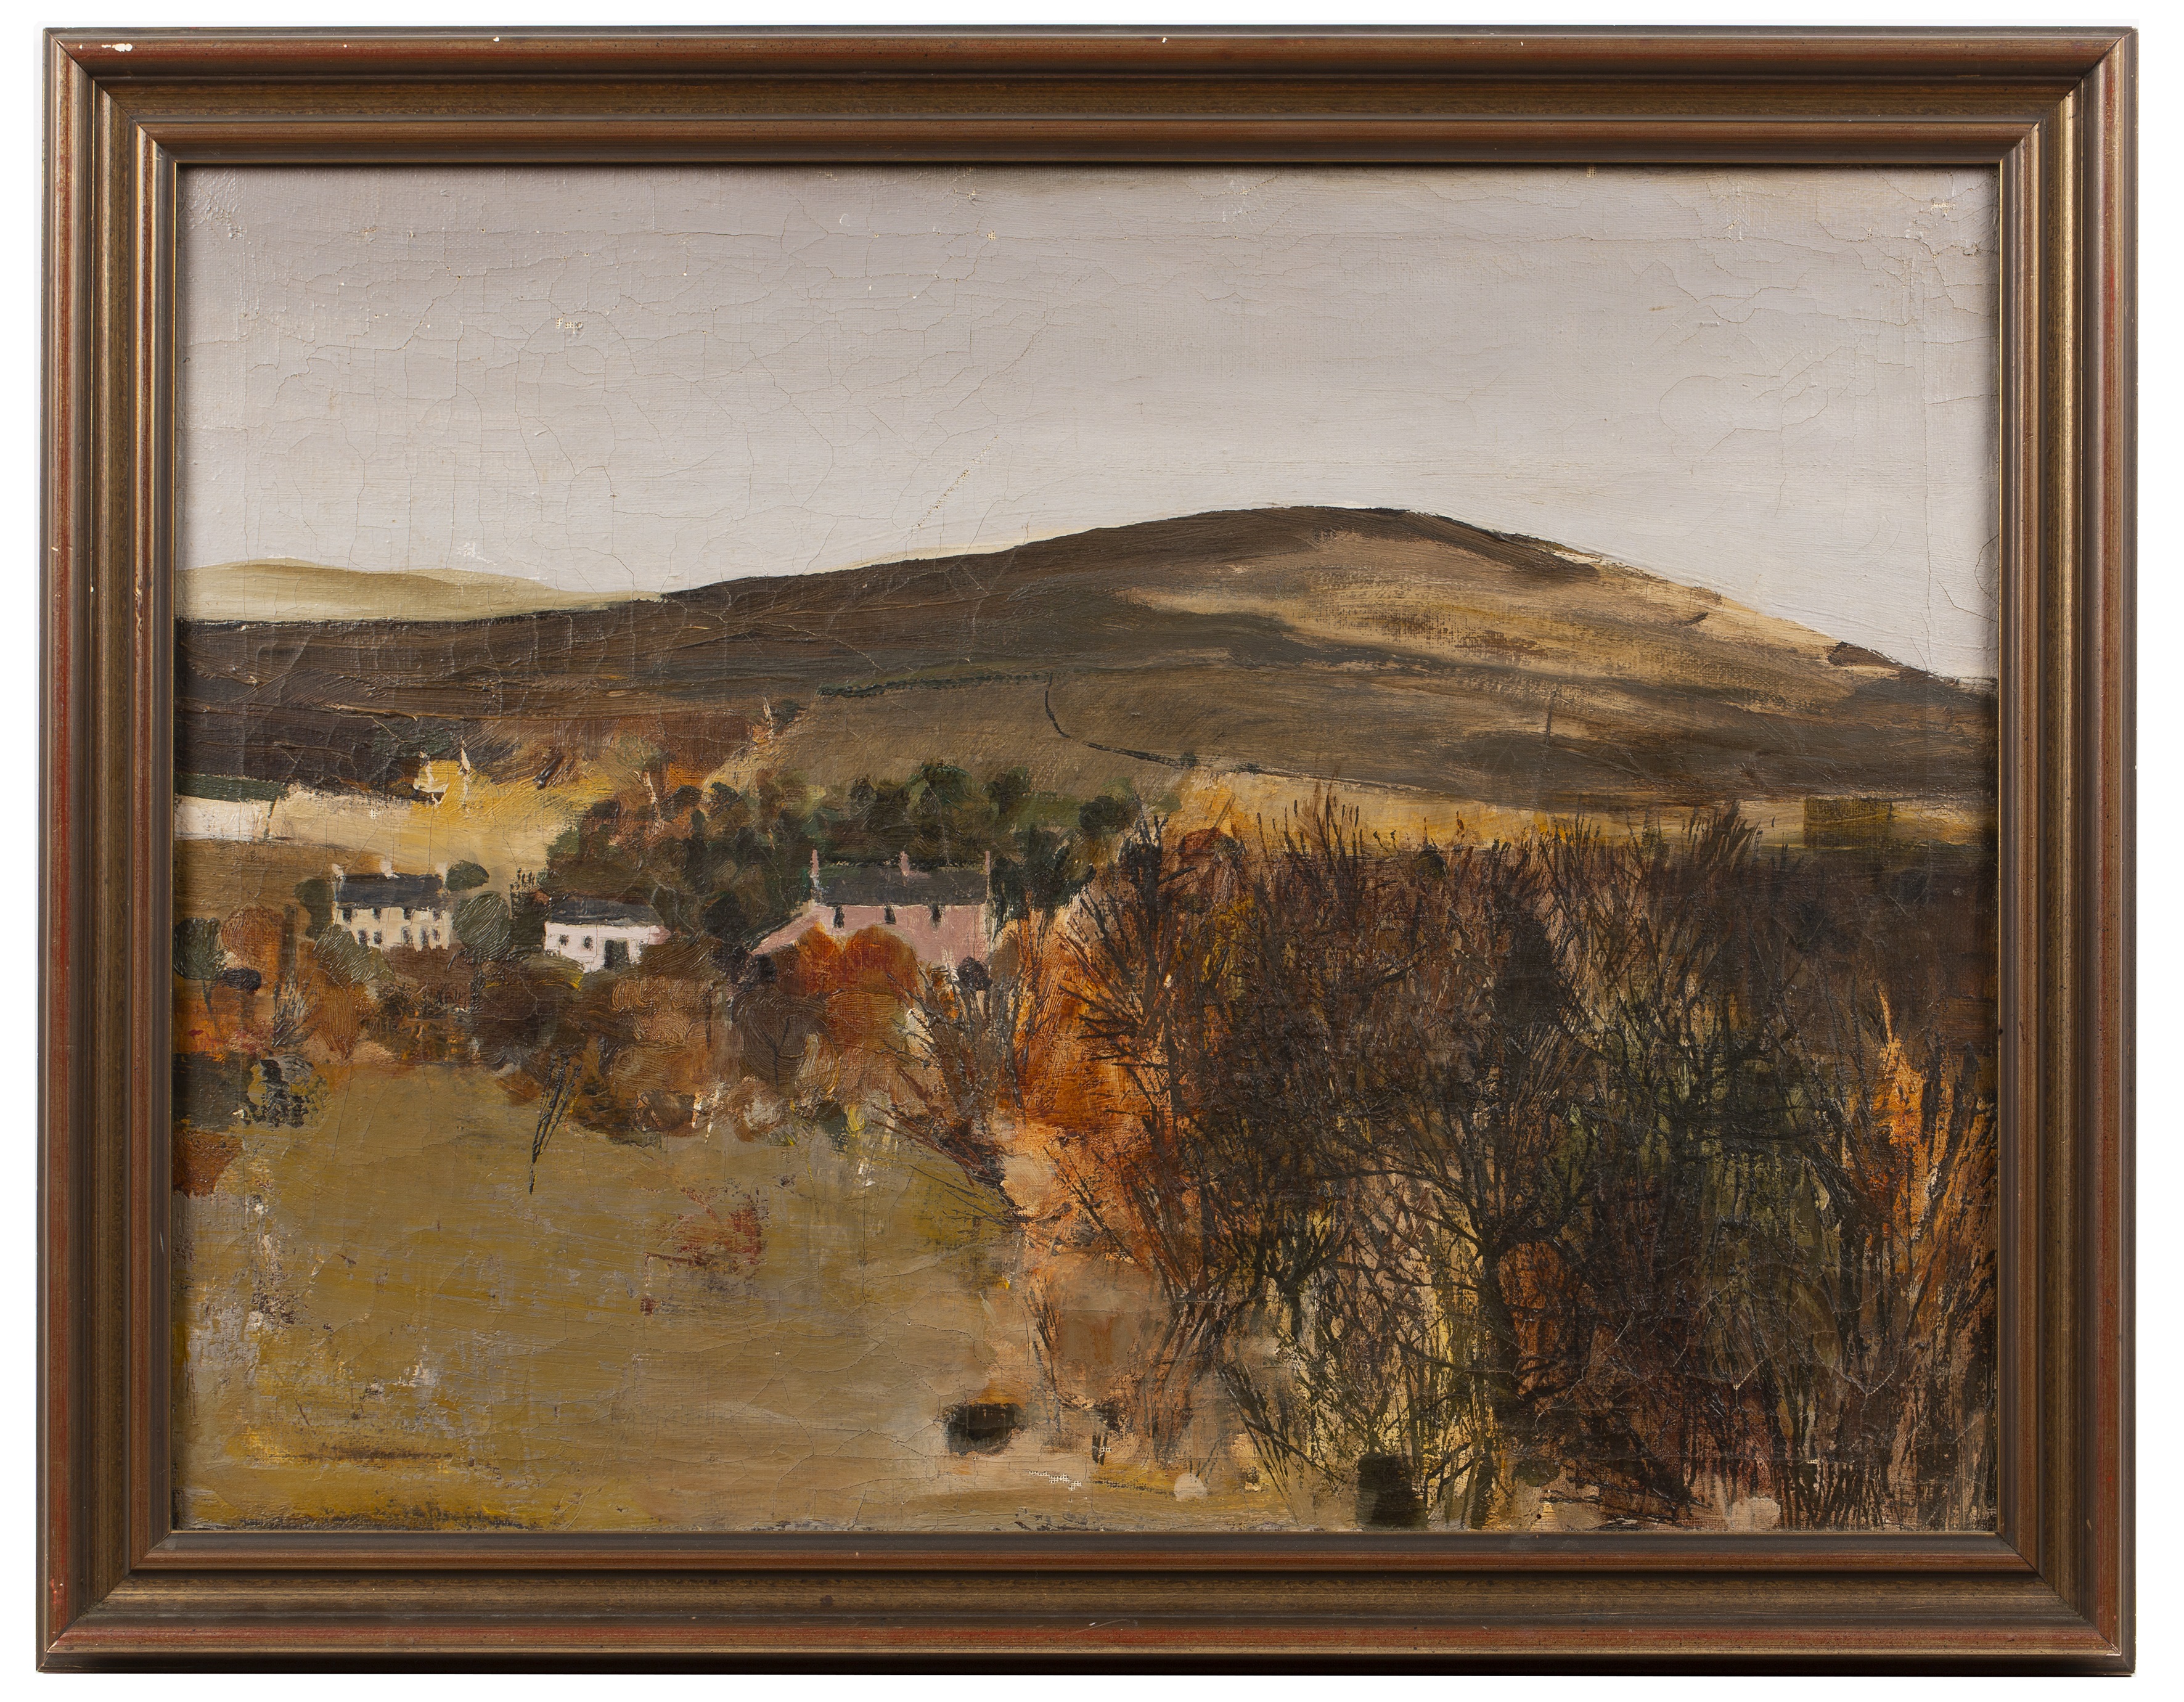 Attributed to John Miller (1931-2002) 'Cornish Landscape', oil on canvas, unsigned, 44.5cm x 60cm - Image 2 of 3